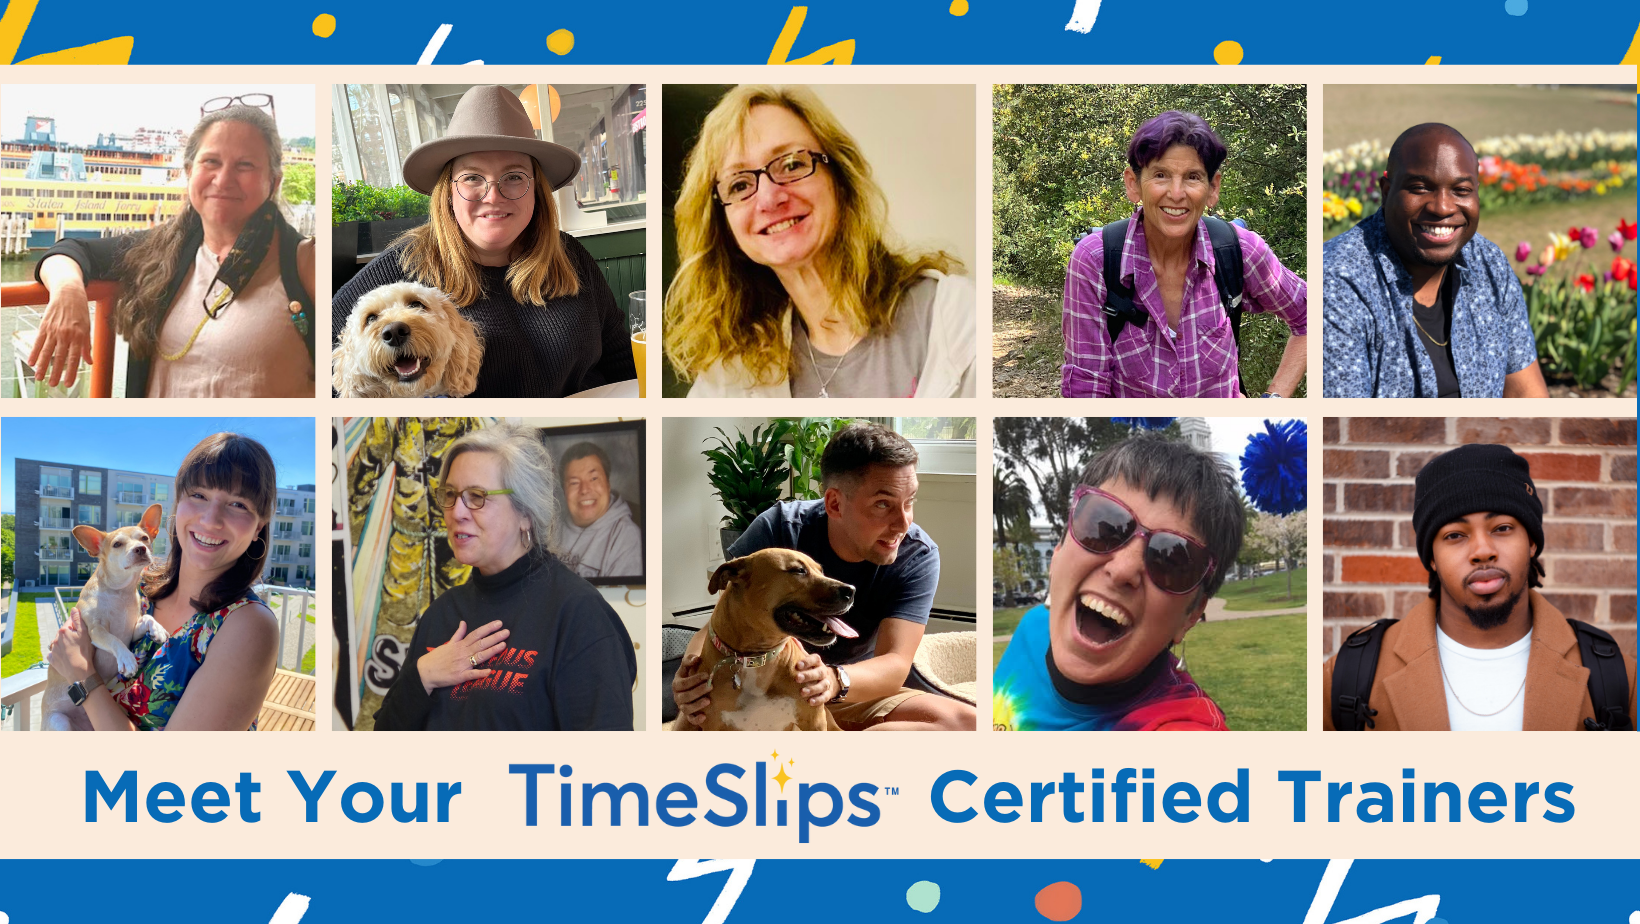 10 images of the Certified Facilitators and the text "Meet your TimeSlips Certified Trainers